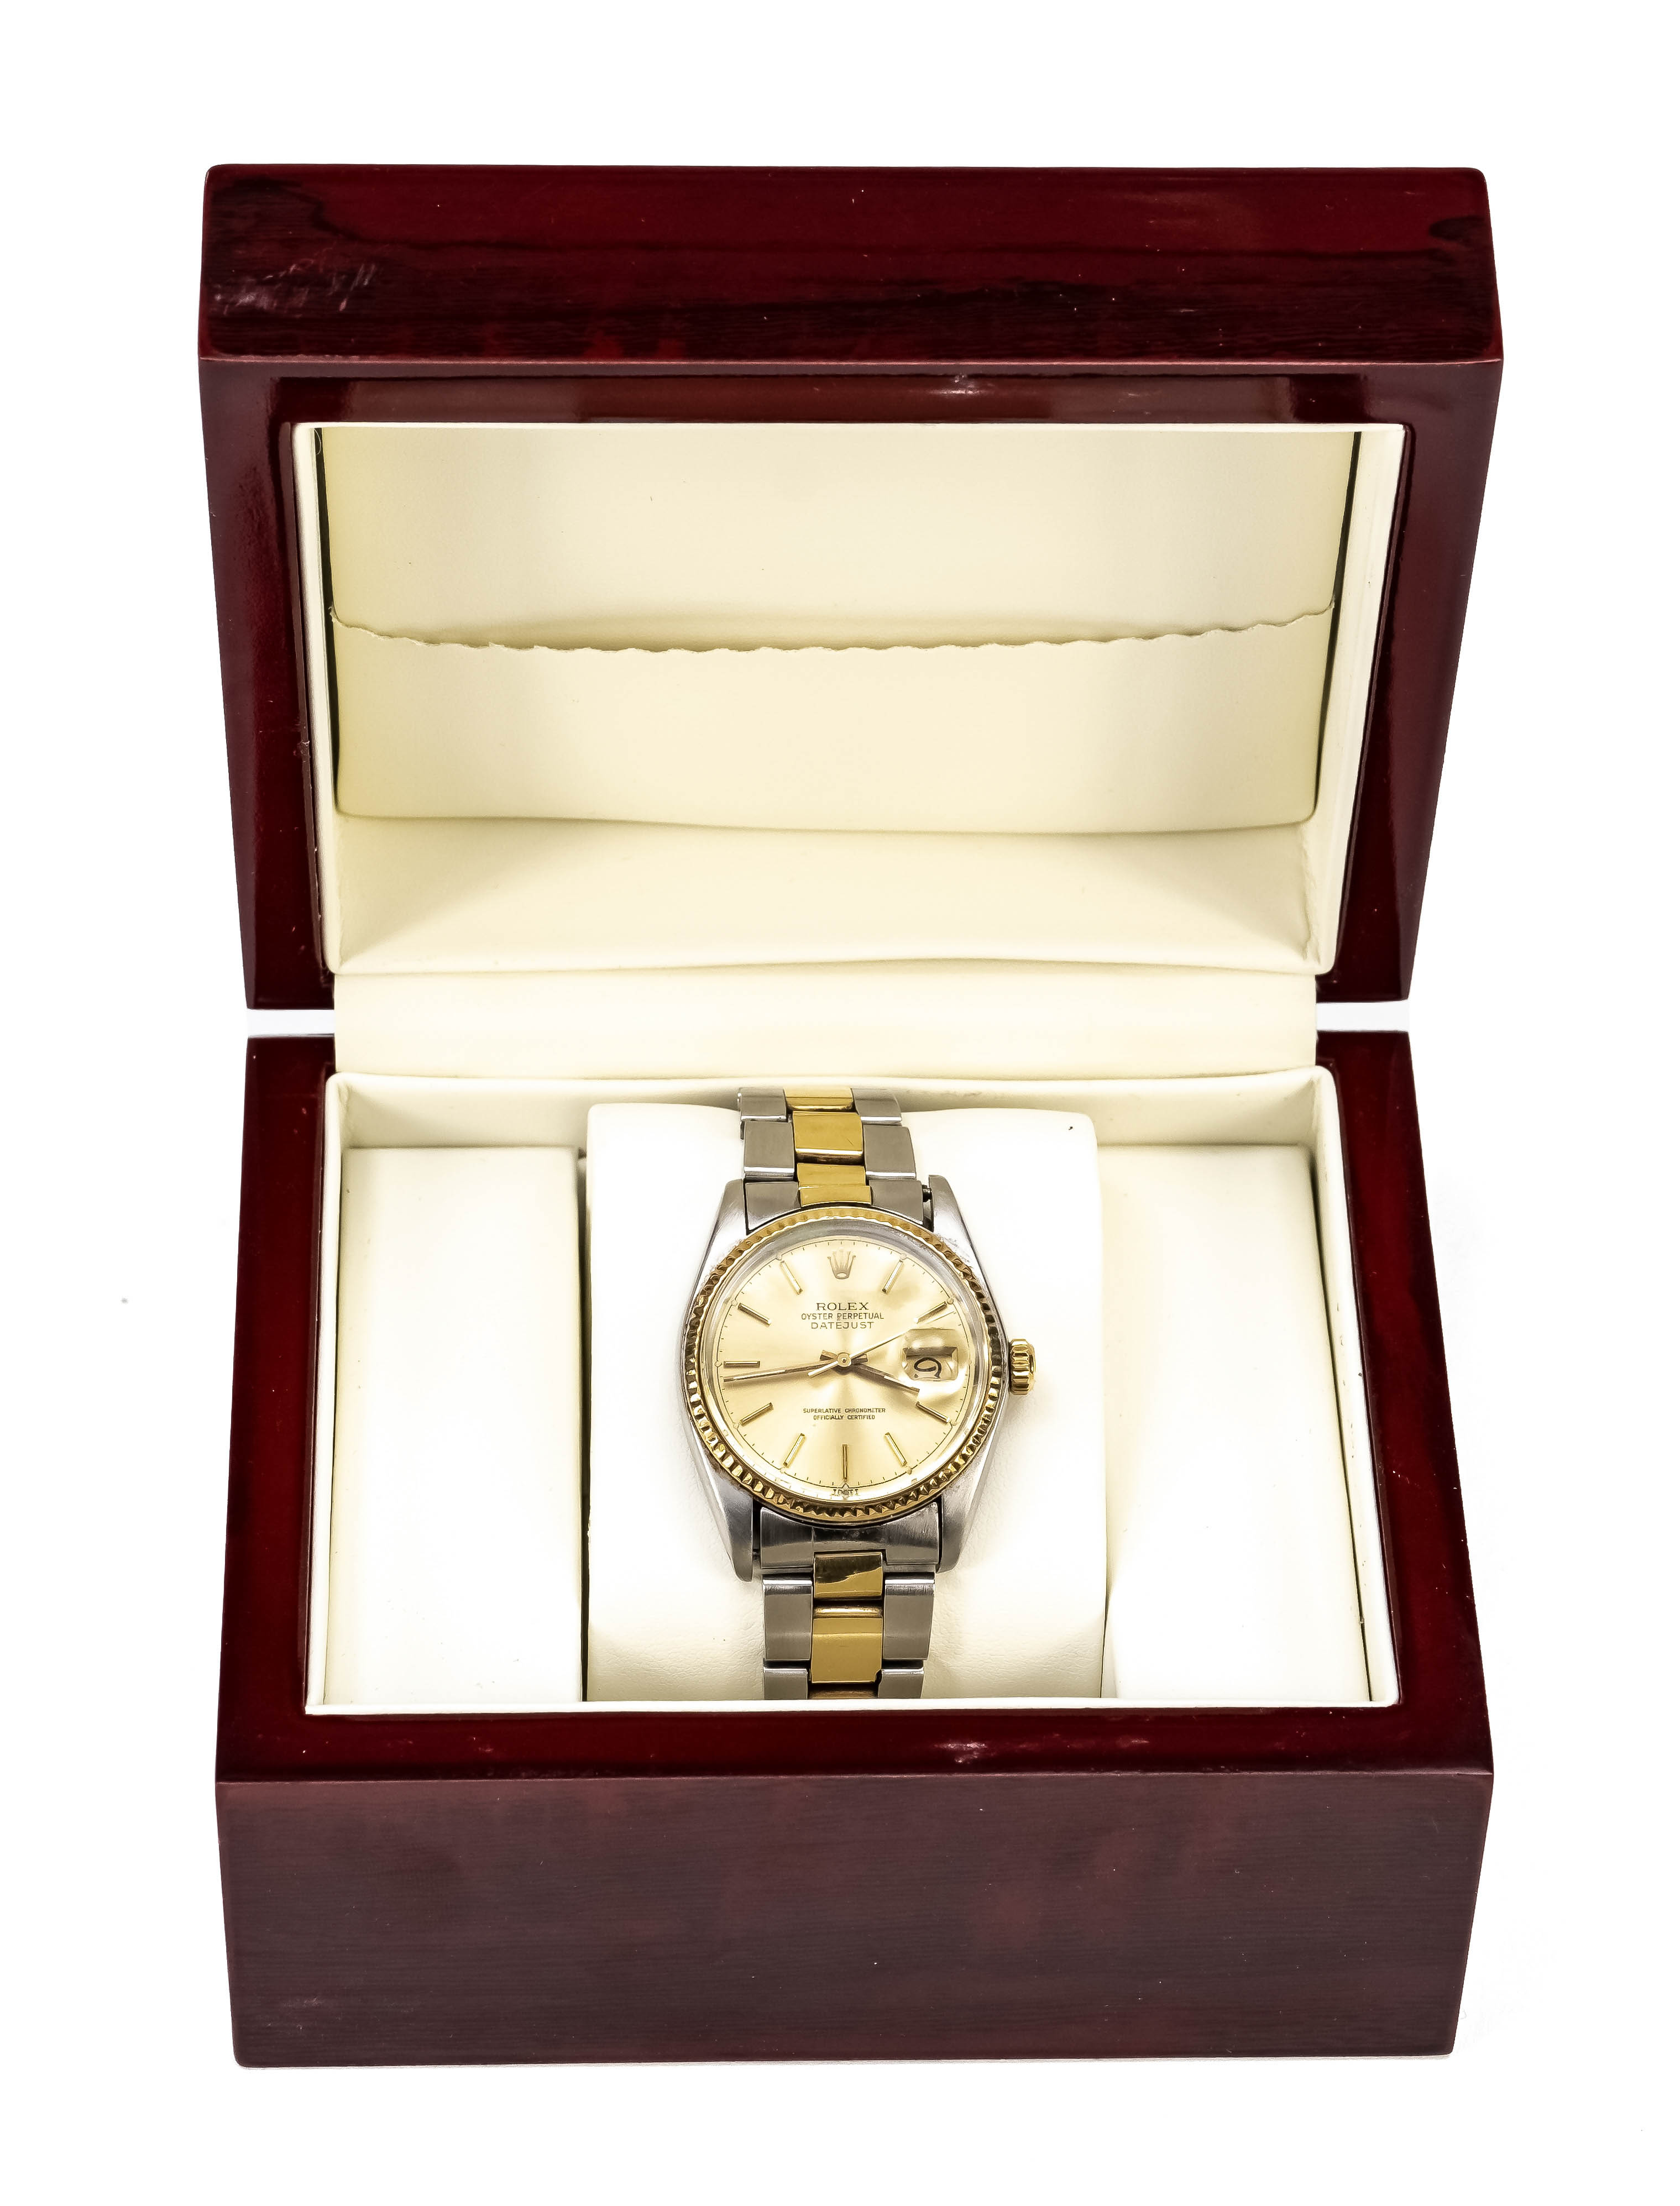 Rolex men's watch, Ref. 16013, Oyster Perpetual Datejust, chronometer, steel gold 750/000 GG, gold - Image 3 of 4